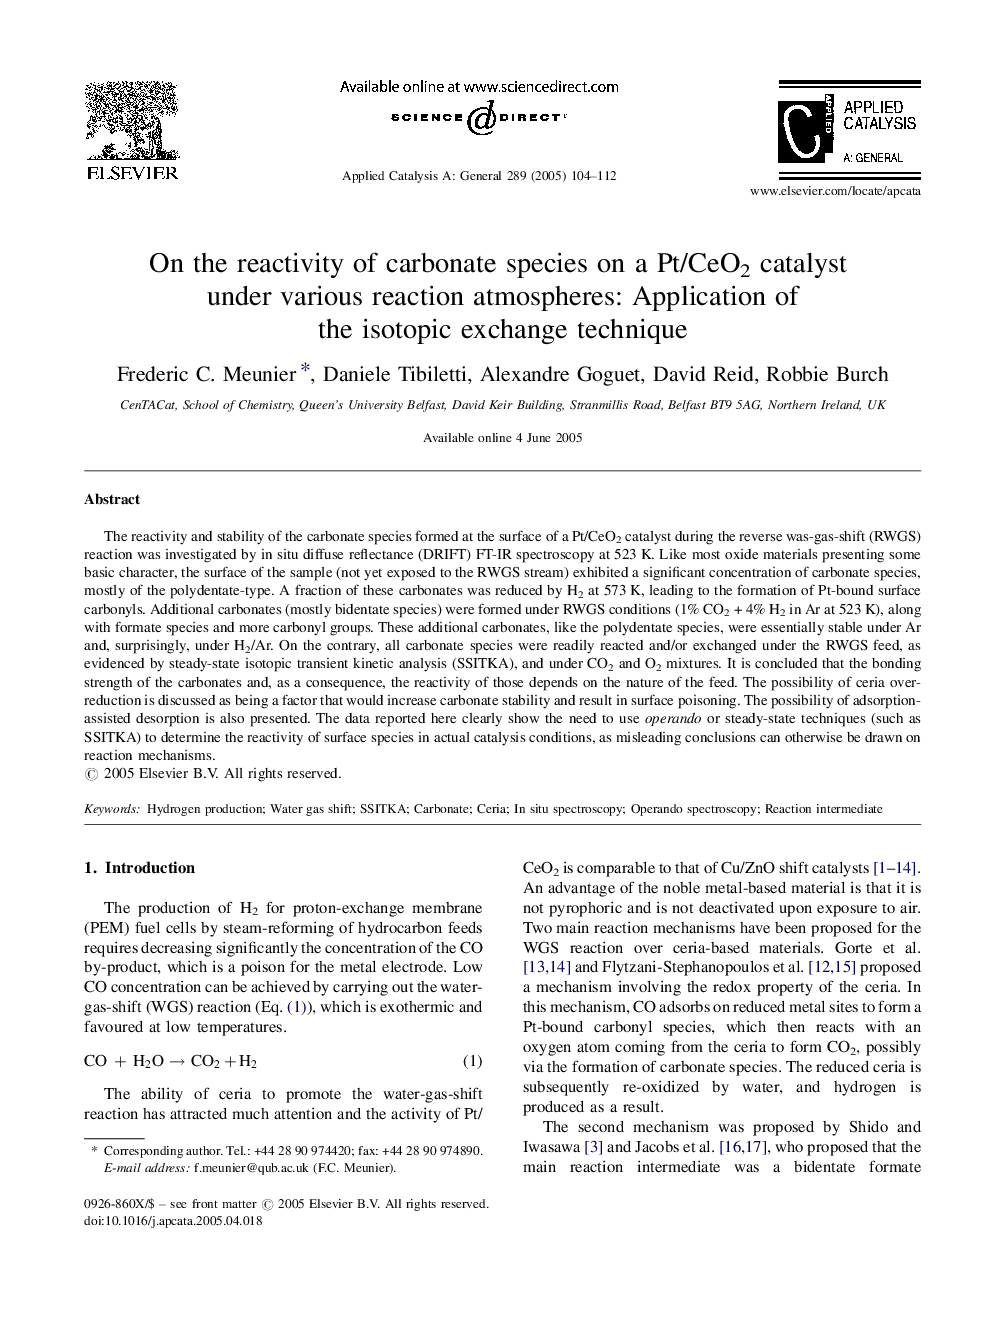 On the reactivity of carbonate species on a Pt/CeO2 catalyst under various reaction atmospheres: Application of the isotopic exchange technique